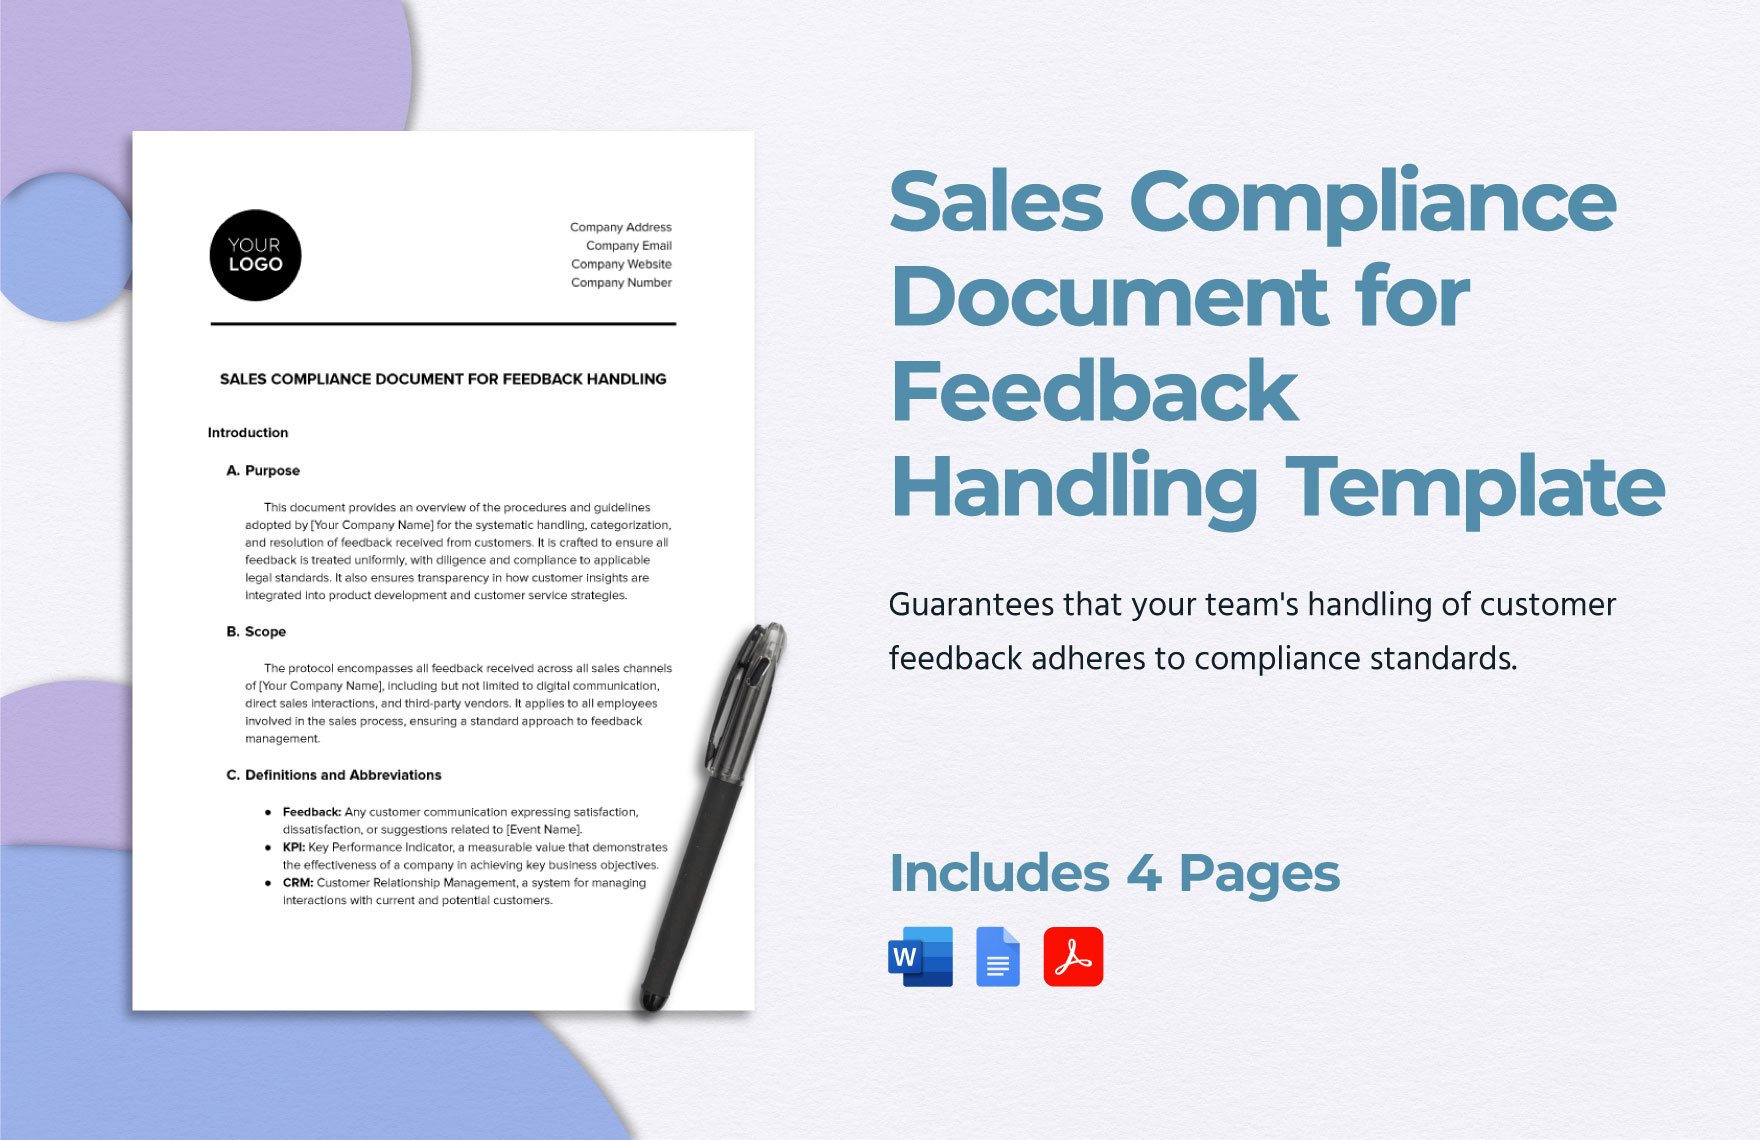 Sales Compliance Document for Feedback Handling Template